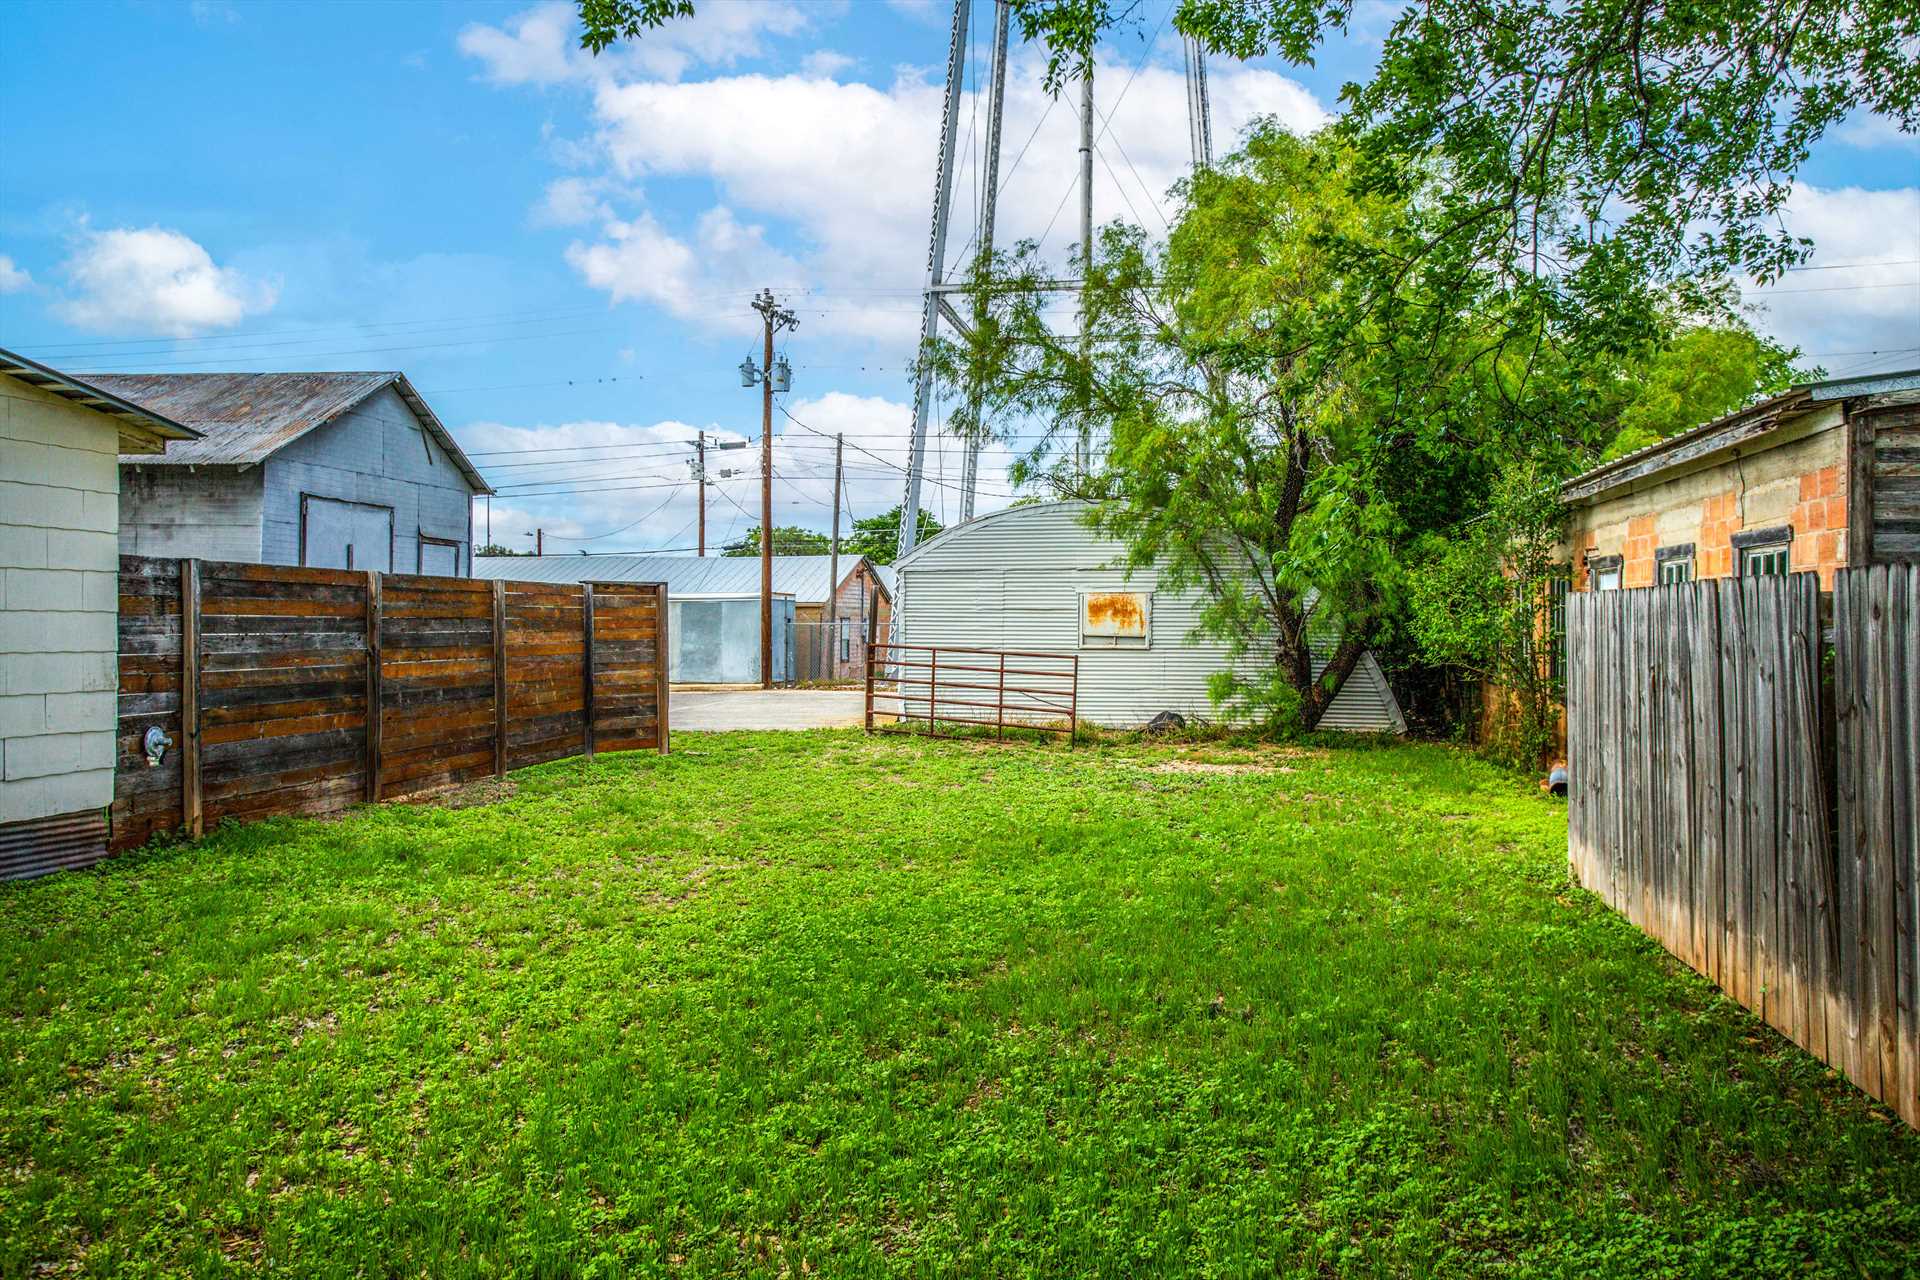                                                 Just one-and-a-half blocks away from Lonesome Dove is the fun and adventure of the Medina River!